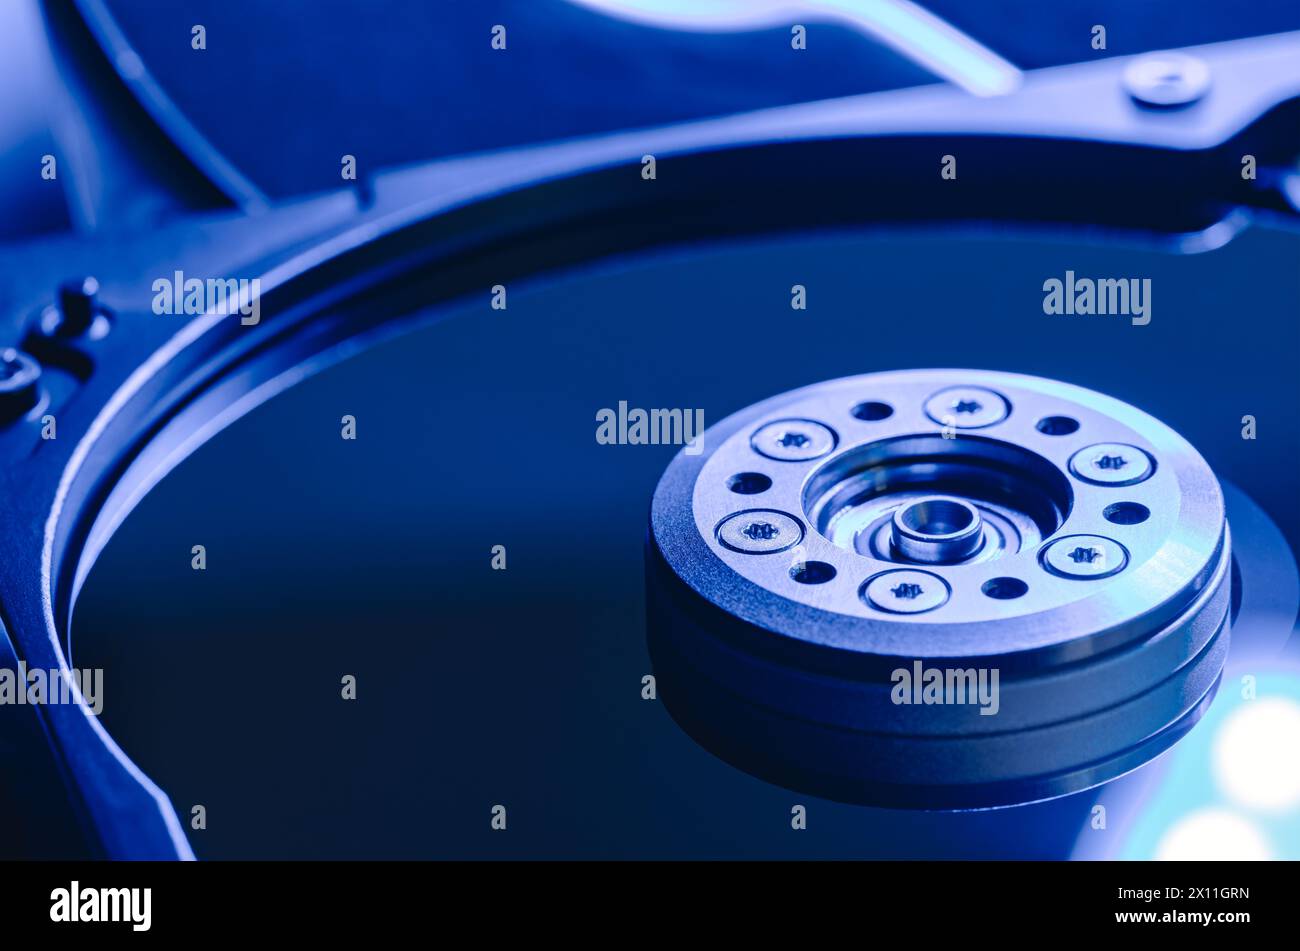 hdd. hard disk drive. computer electronic component. abstract technology background. Stock Photo